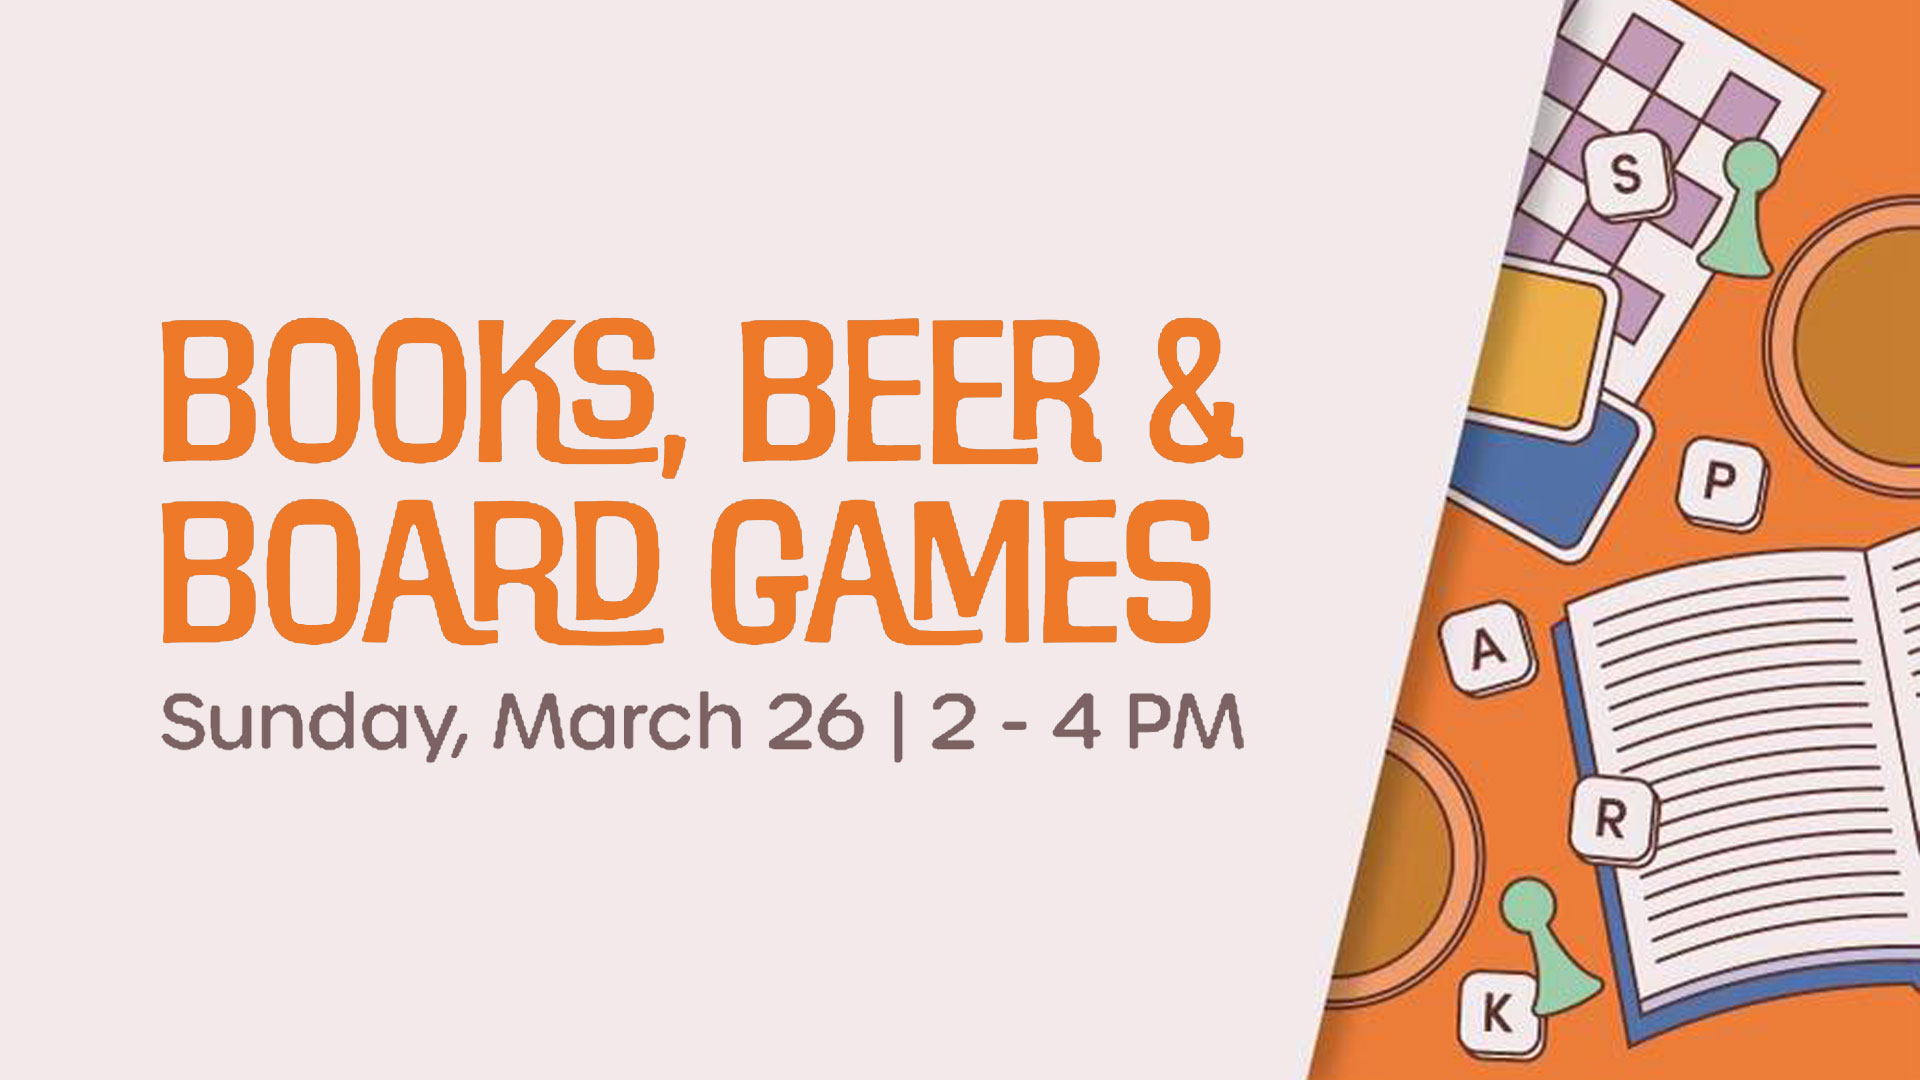 Books, Beer, and Board Games Fundraising Event Image